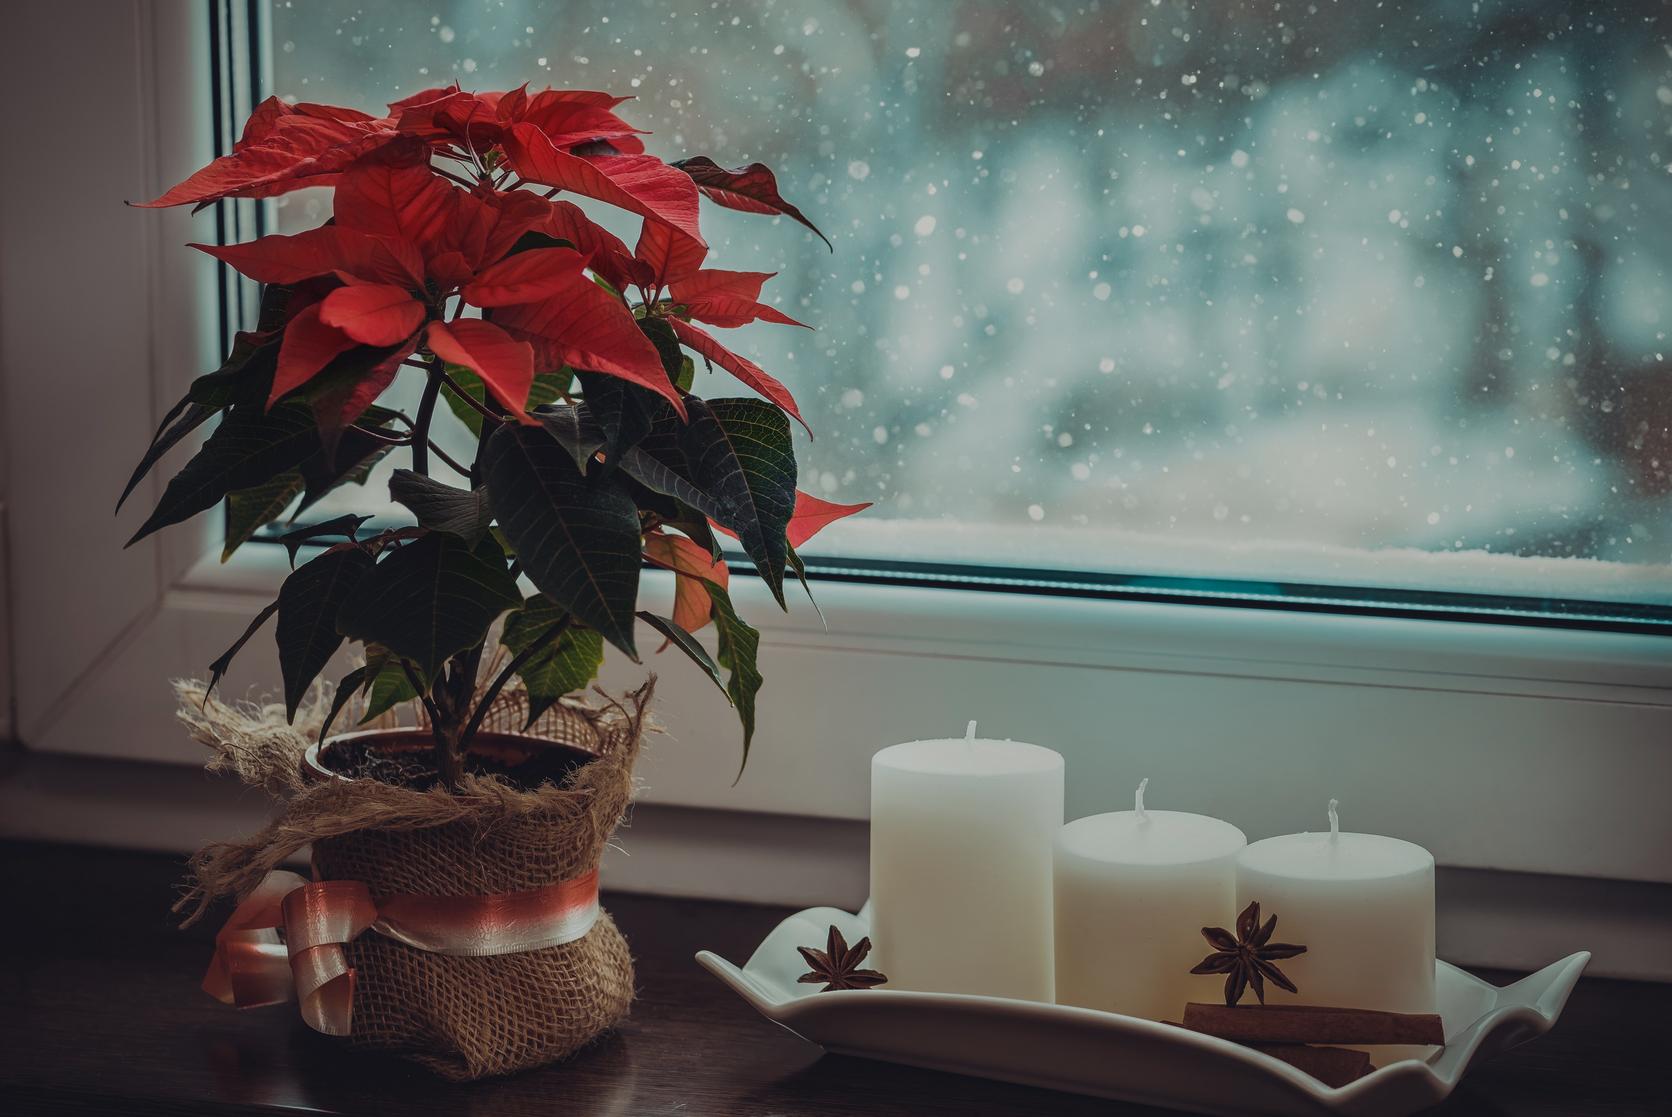 Poinsettia_and_candles_on_a_windowsill_with_snow_outside